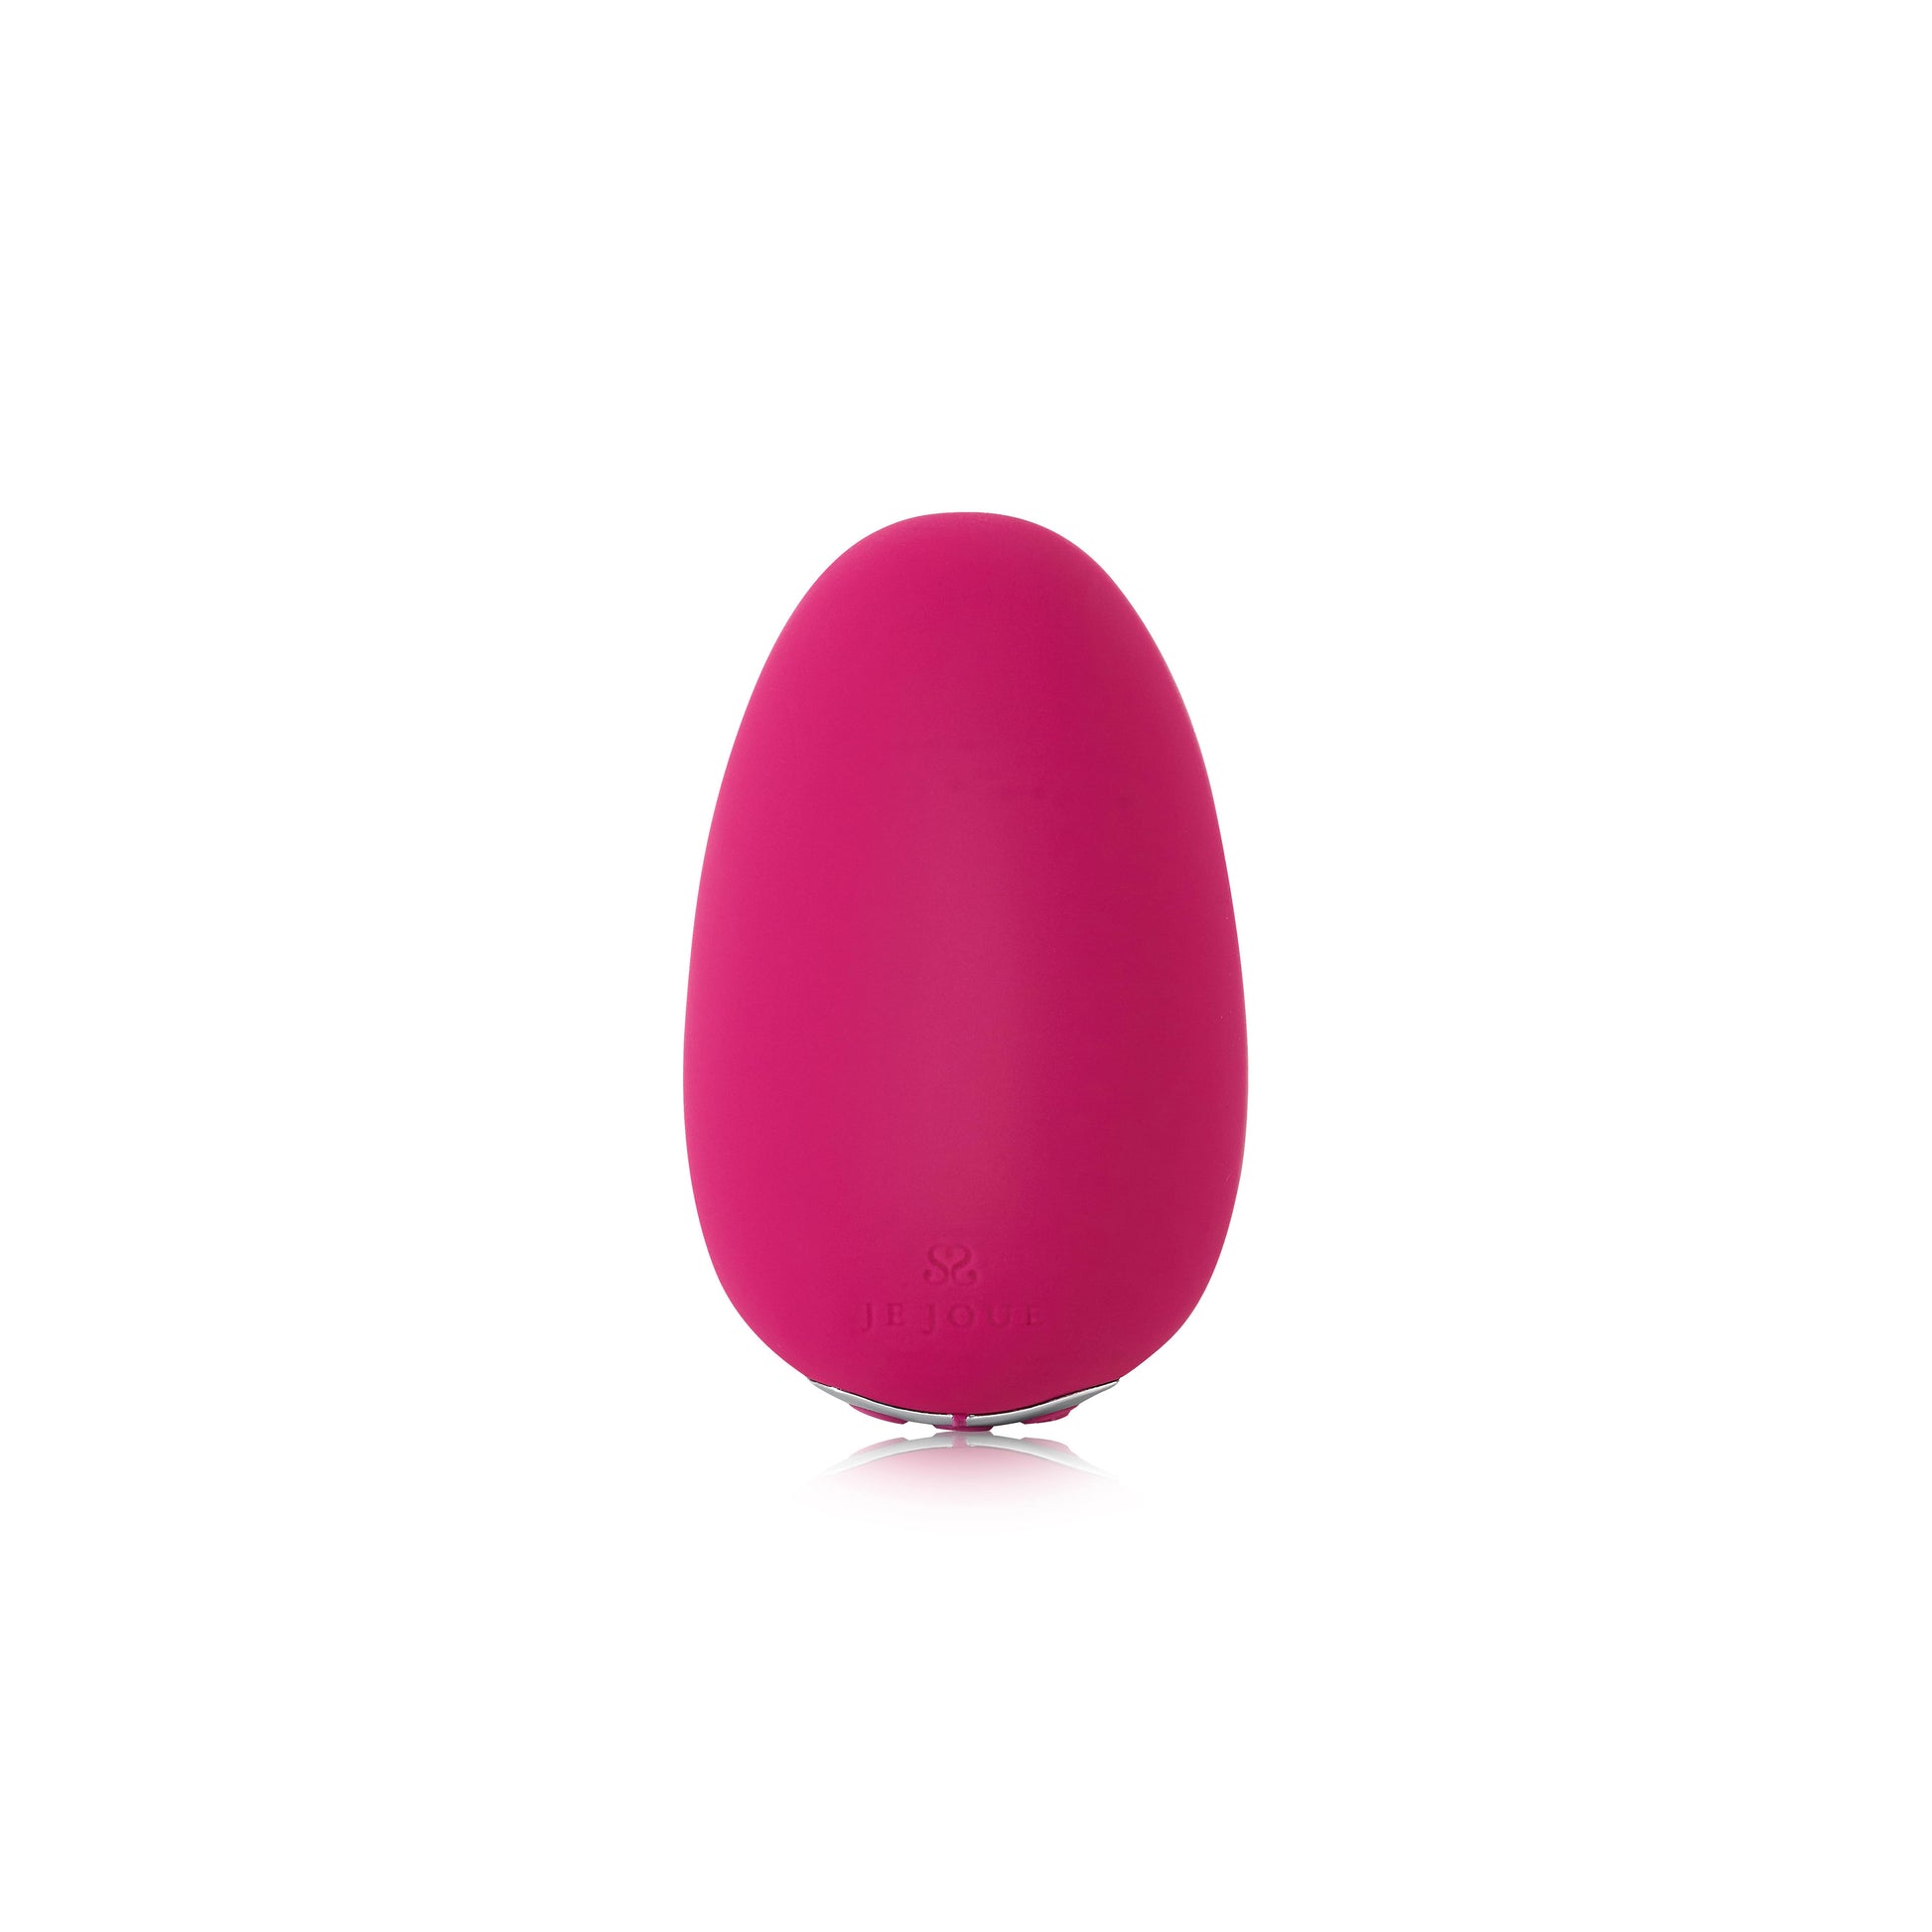 Mimi Vibrator in pink front view 